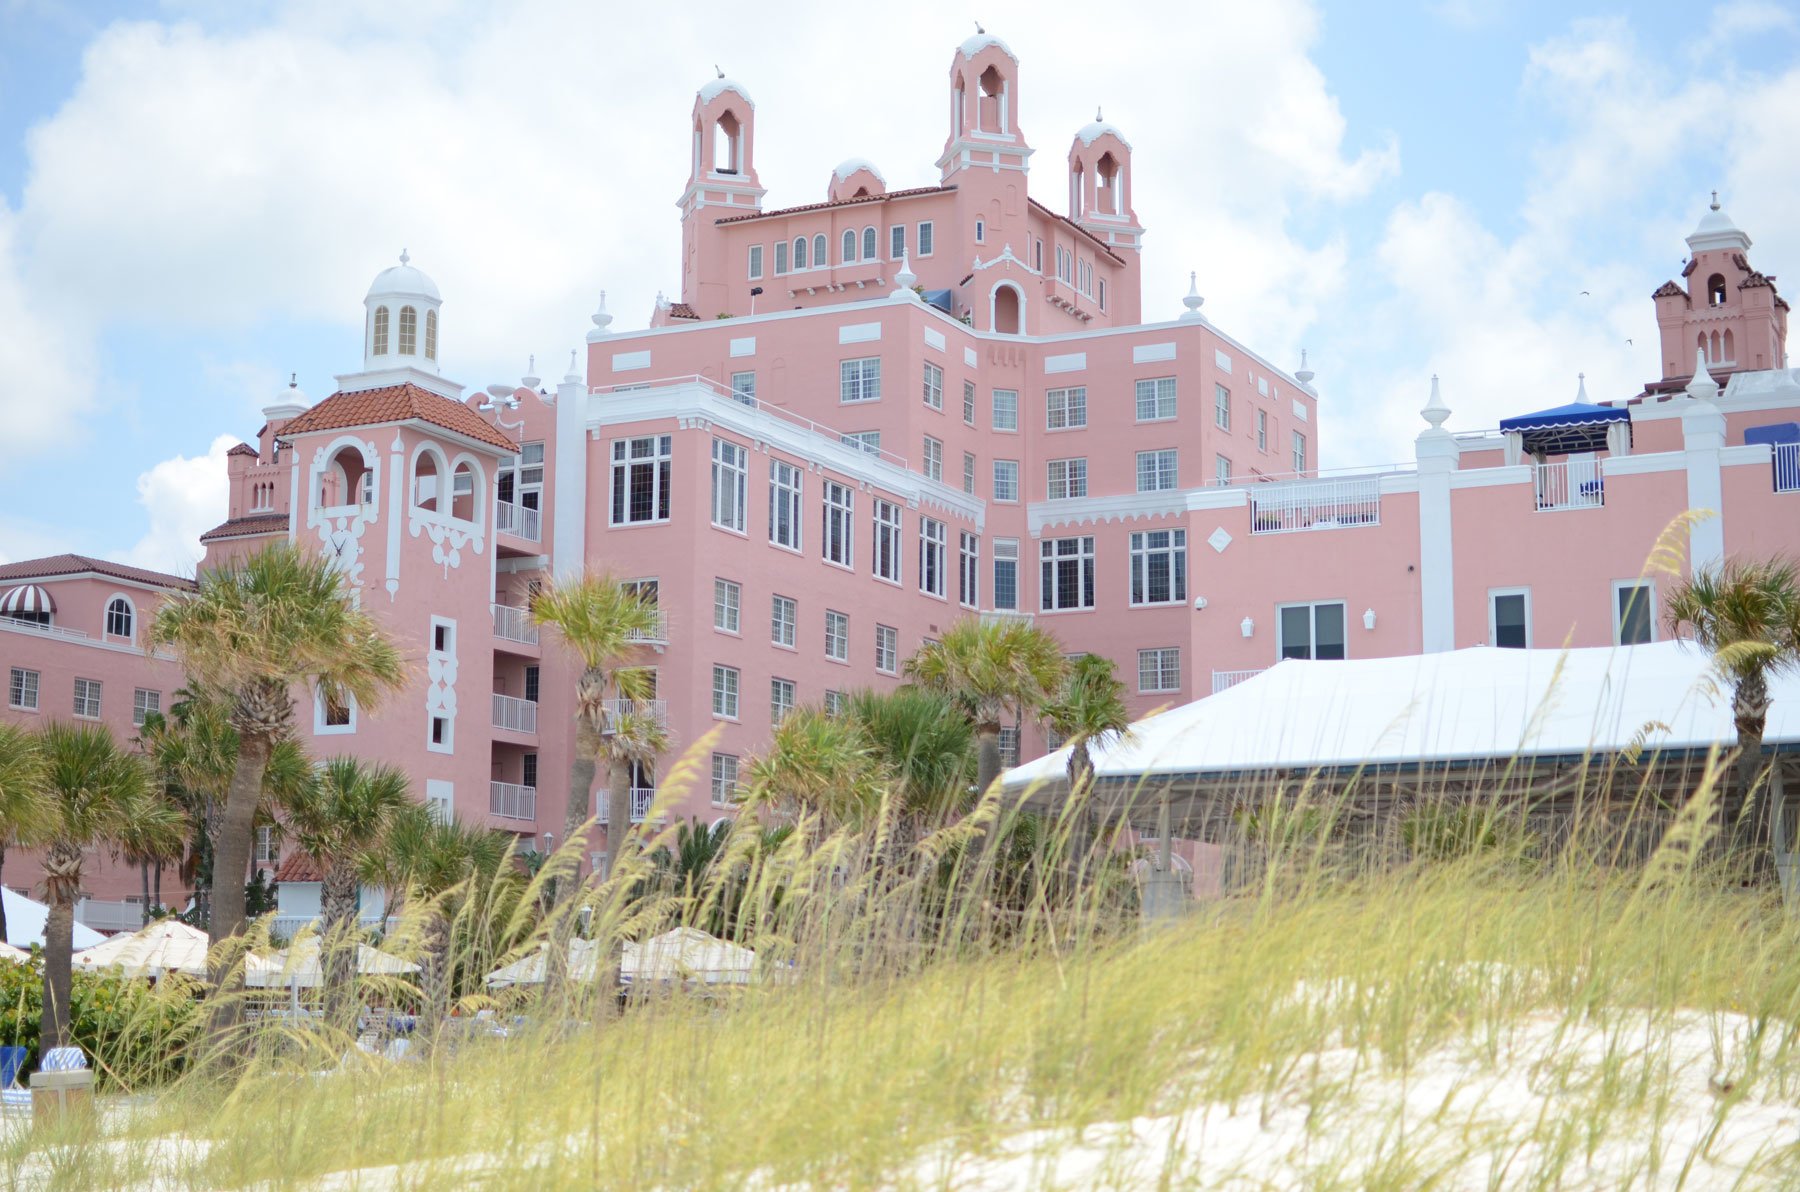 The Don Cesar Hotel, Clearwater, Florida